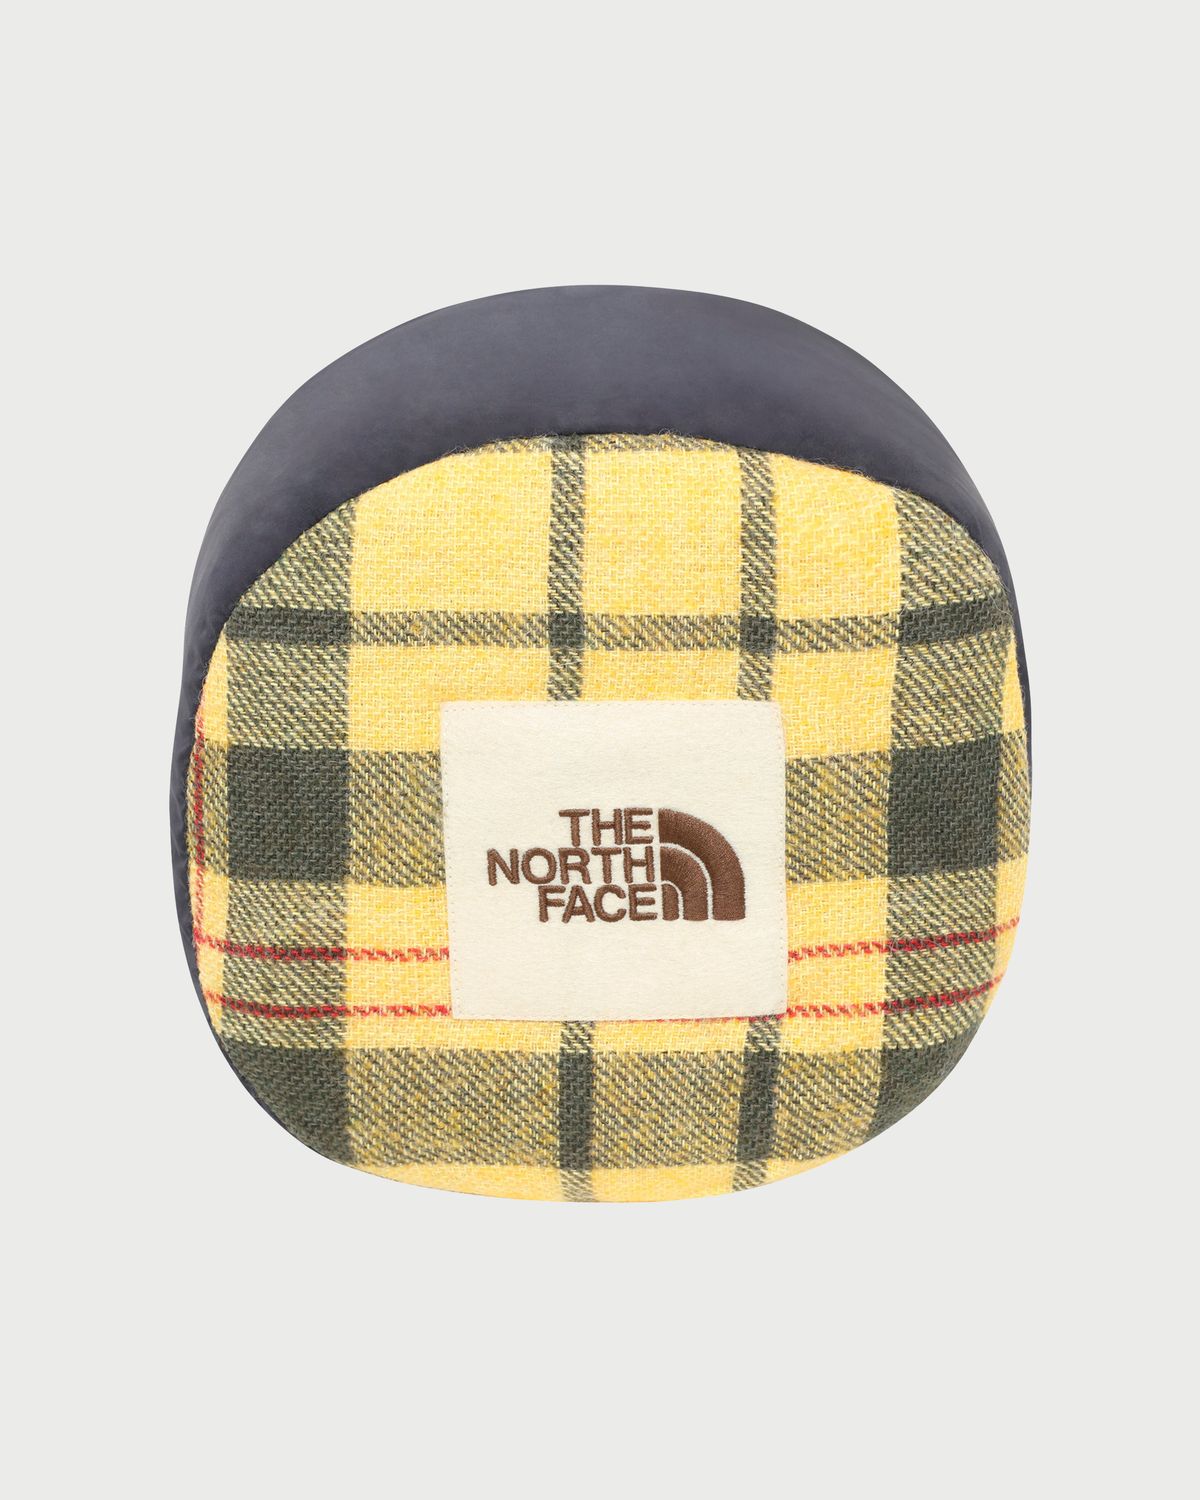 The North Face – Brown Label Insulated Scarf Summer Gold Heritage Unisex - Knits - Yellow - Image 3